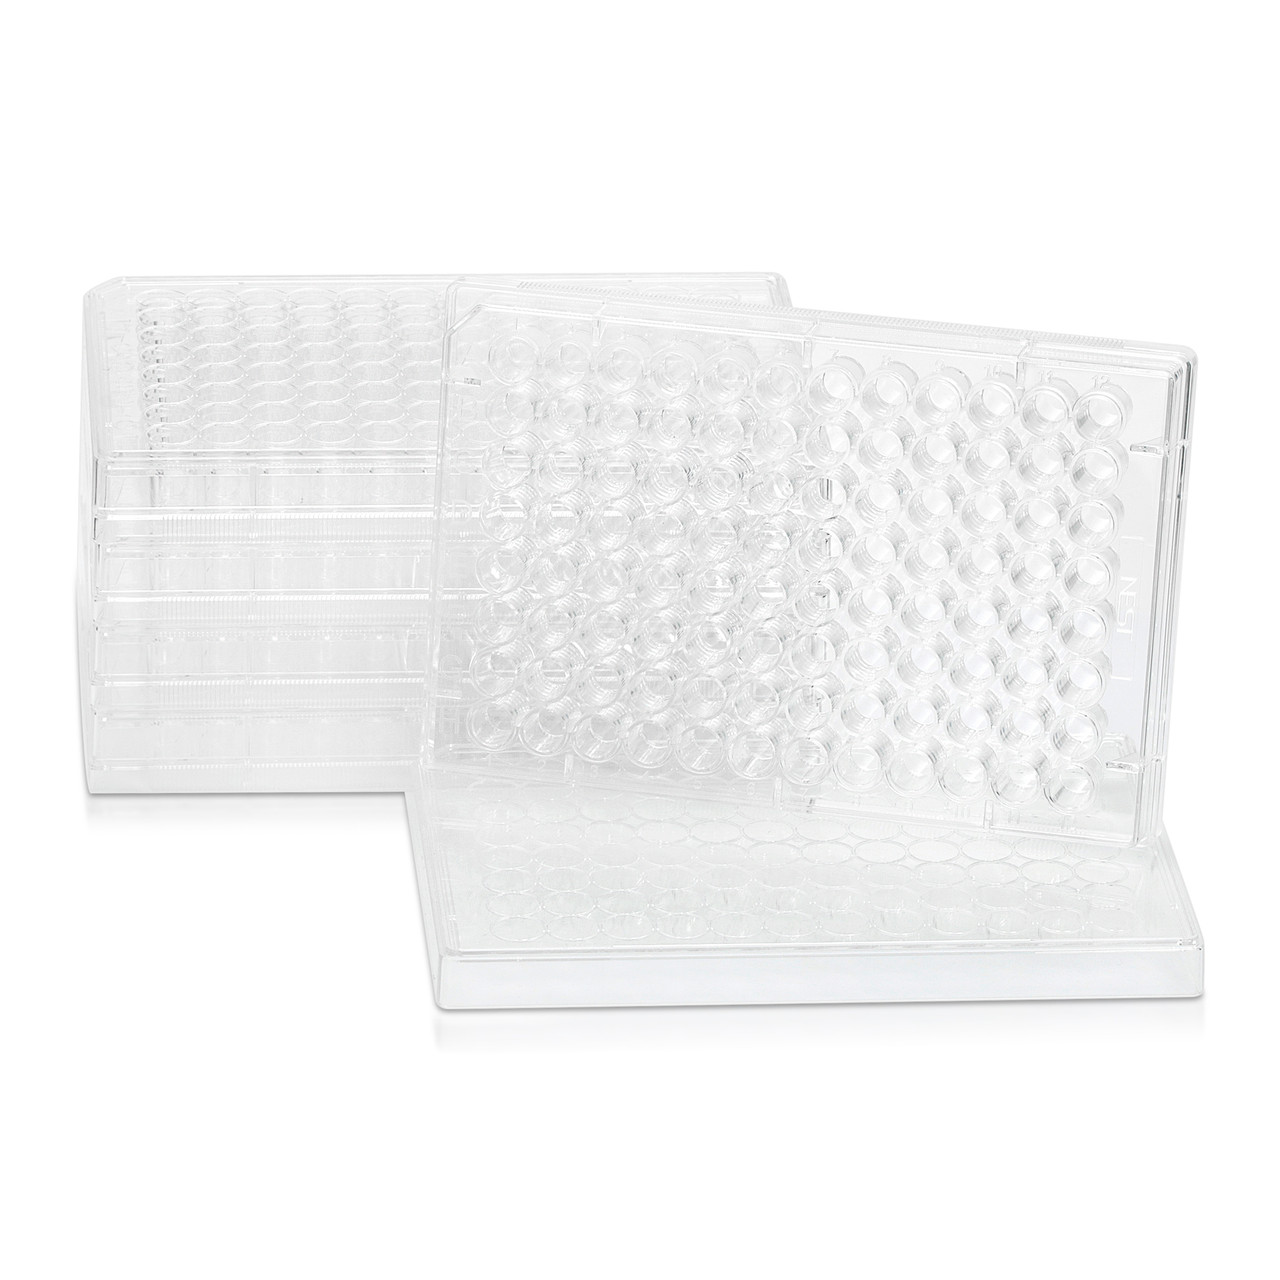 96 Well Glass Bottom Plates - for Human Primary Cell Cultures